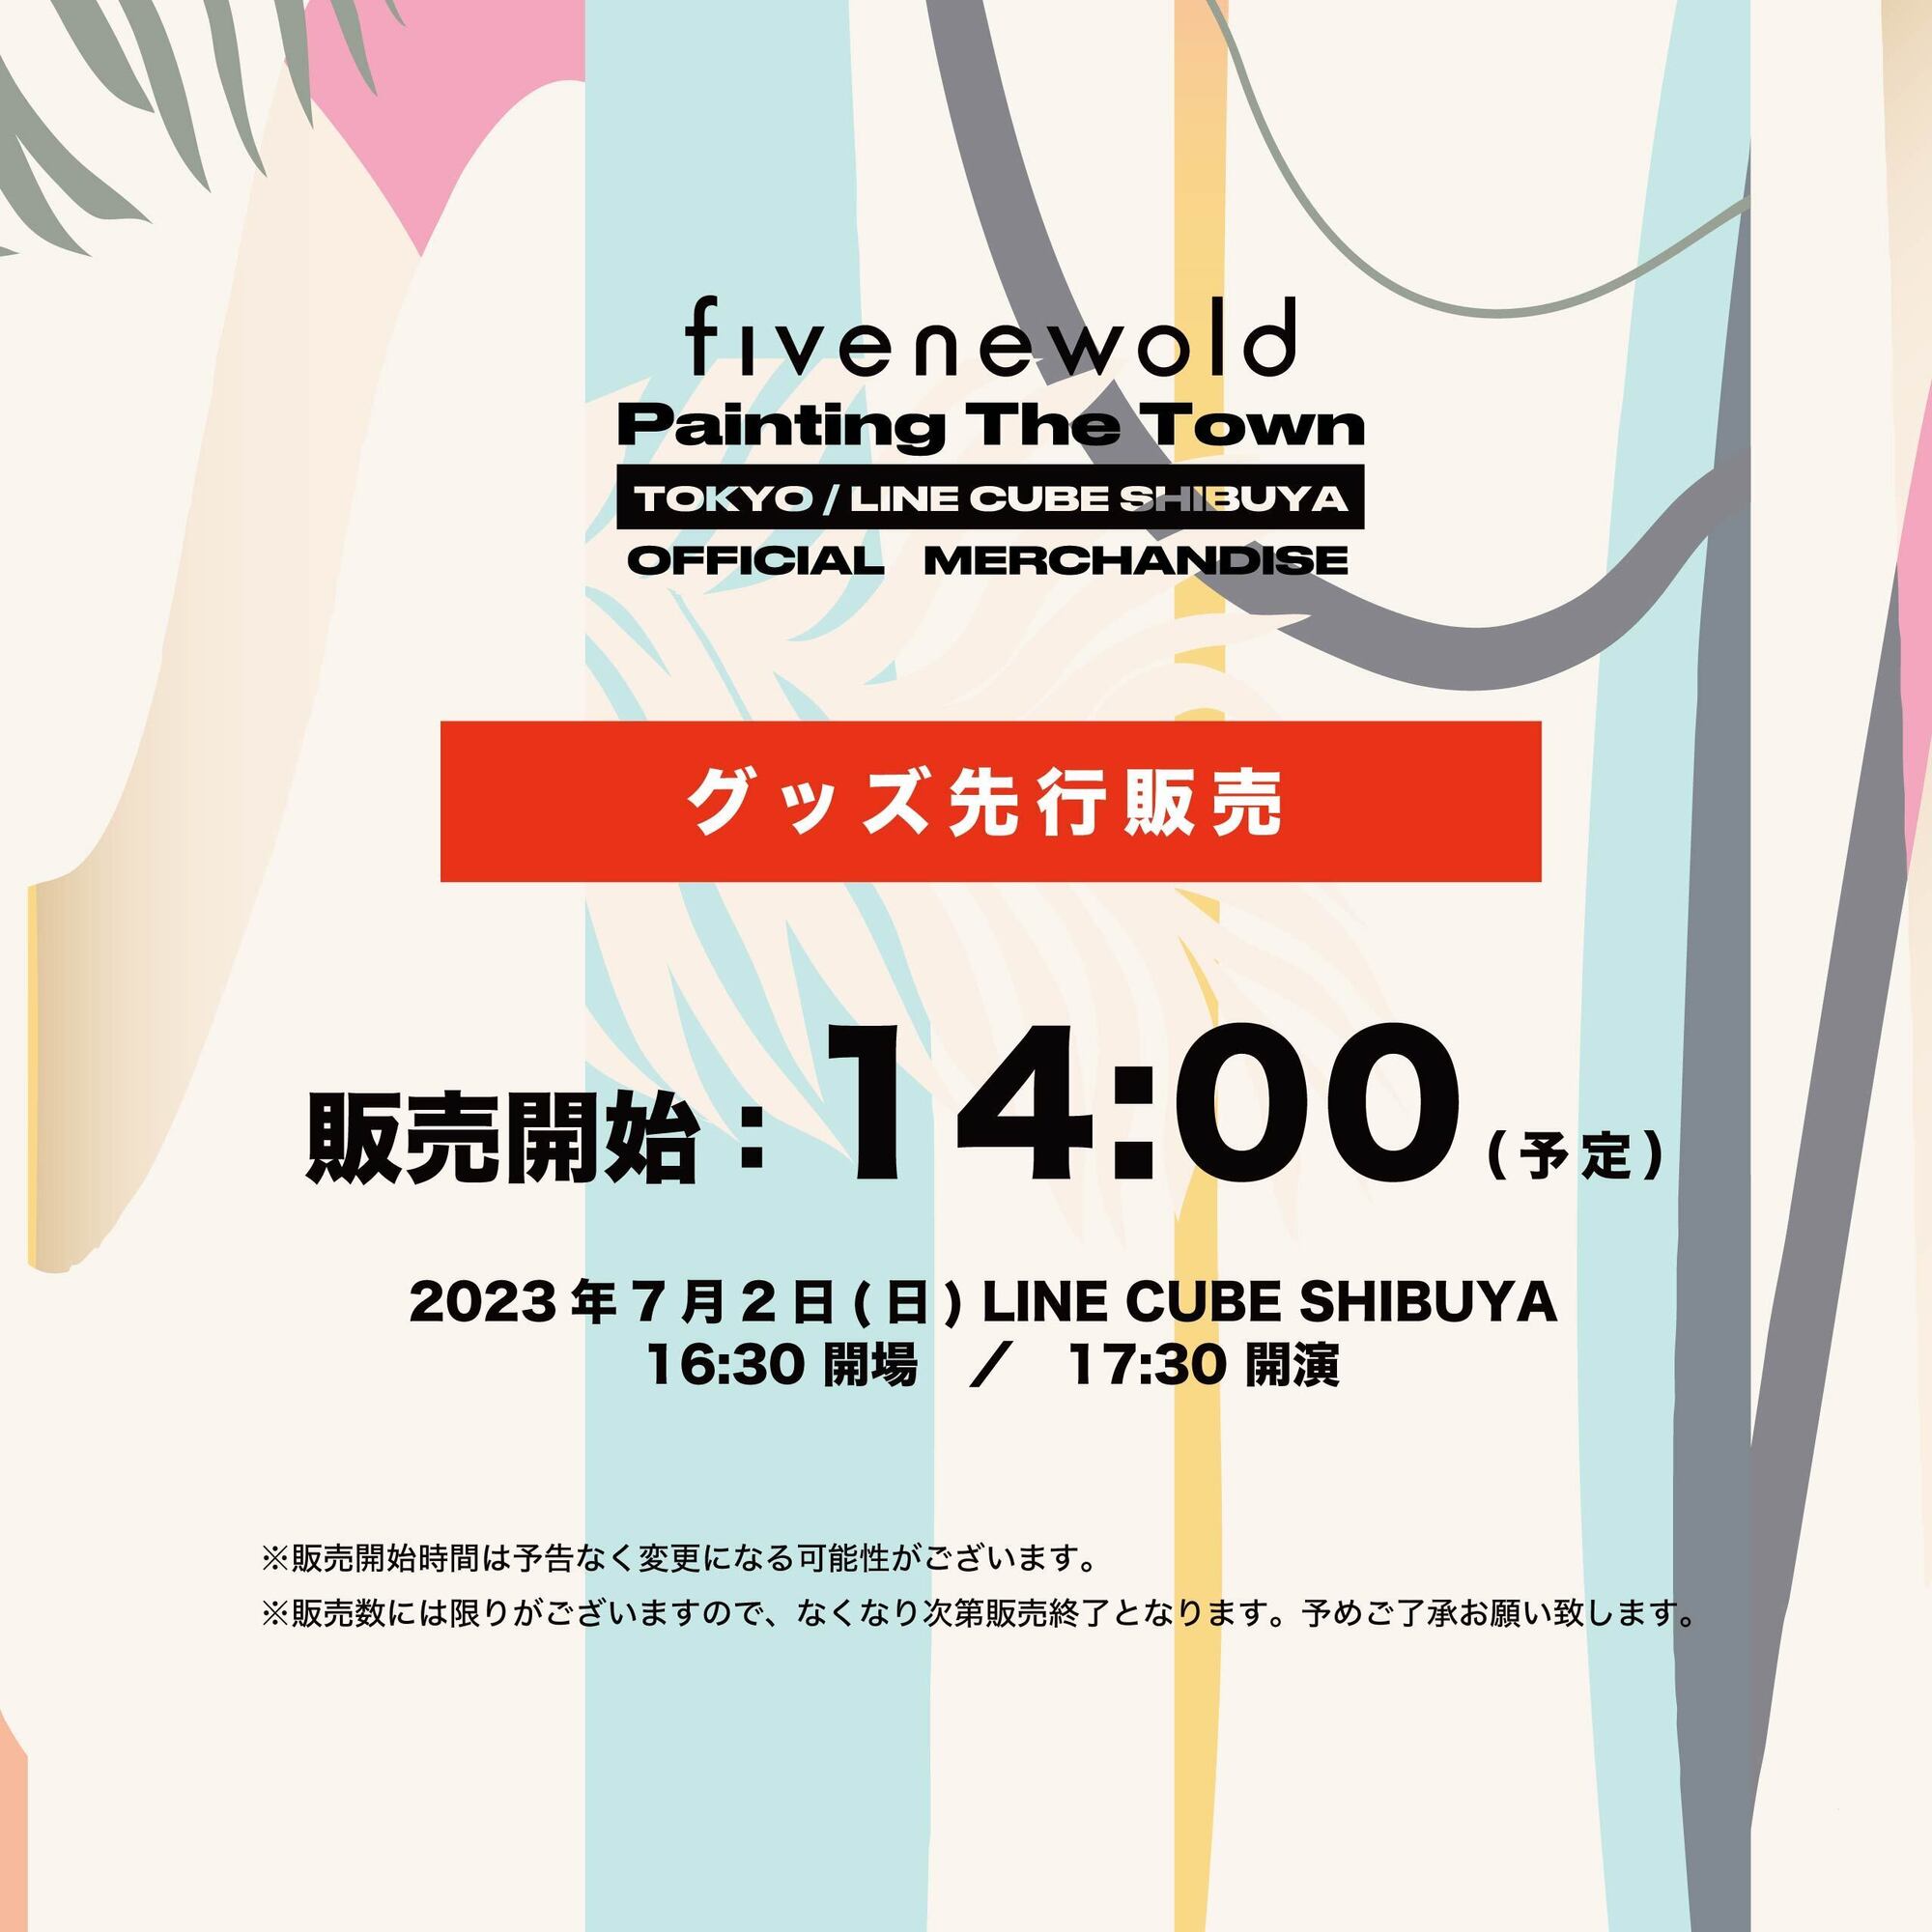 7/2 LINE CUBE SHIBUYA 物販先行情報 | FIVE NEW OLD OFFICIAL WEB SITE